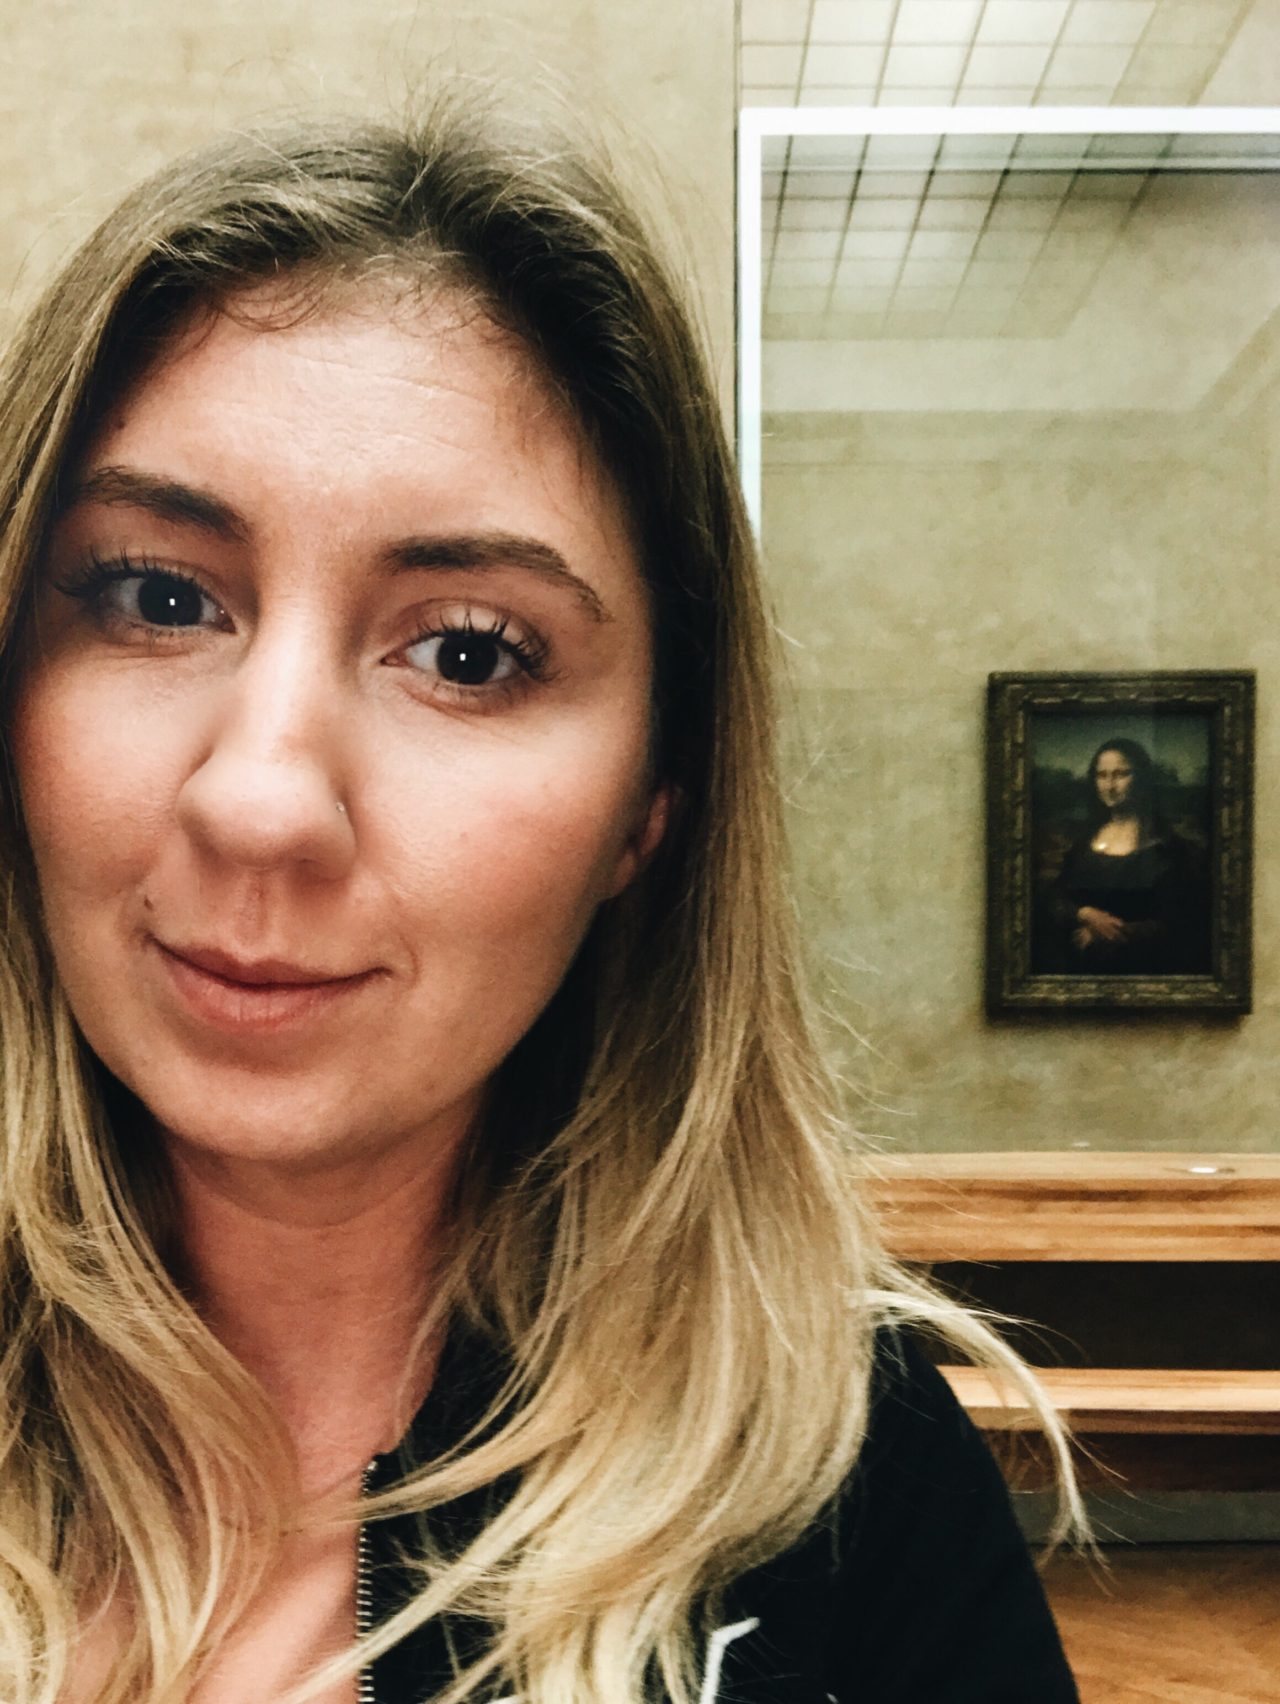 Monica in a selfie photo with the Mona Lisa at The Louvre in paris